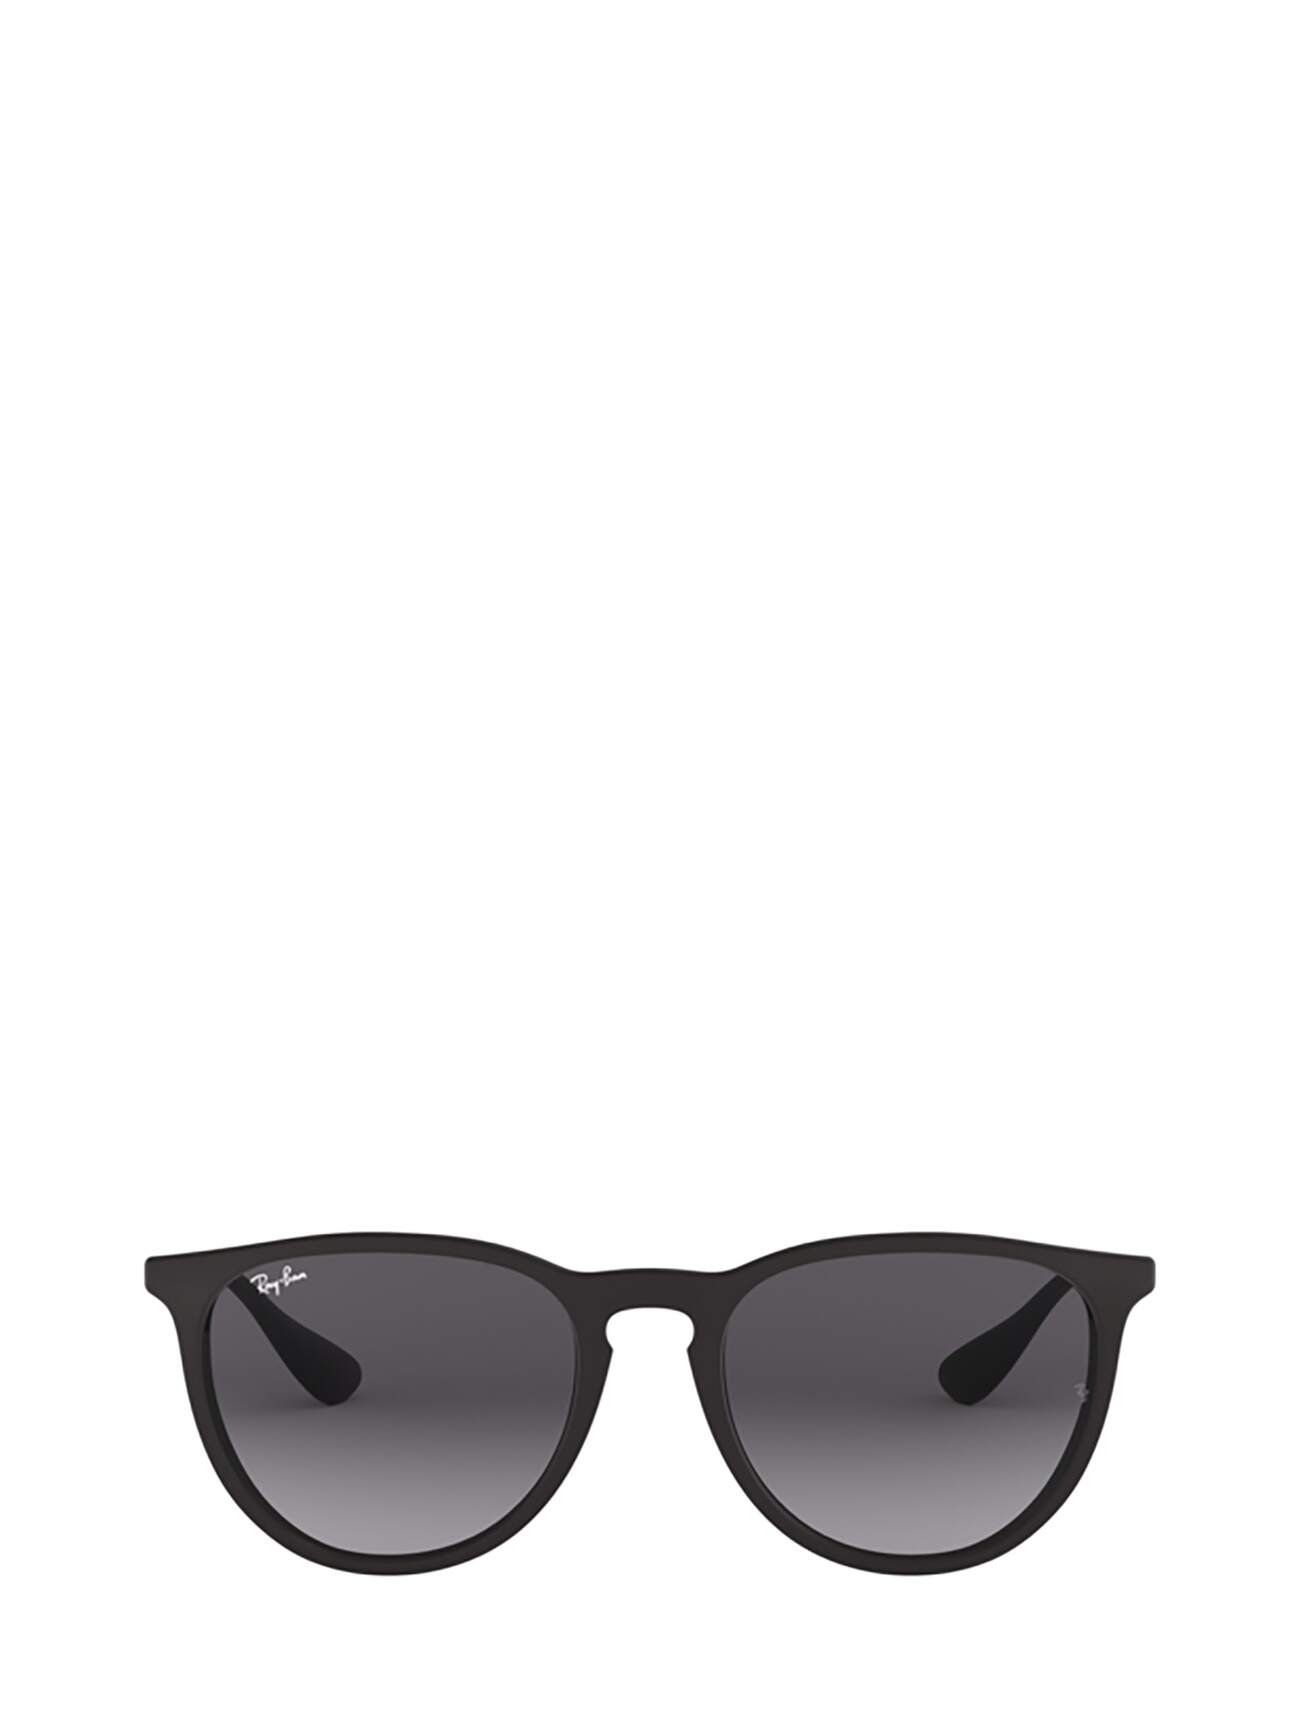 Ray-Ban Rb4171 Rubber Black Sunglasses